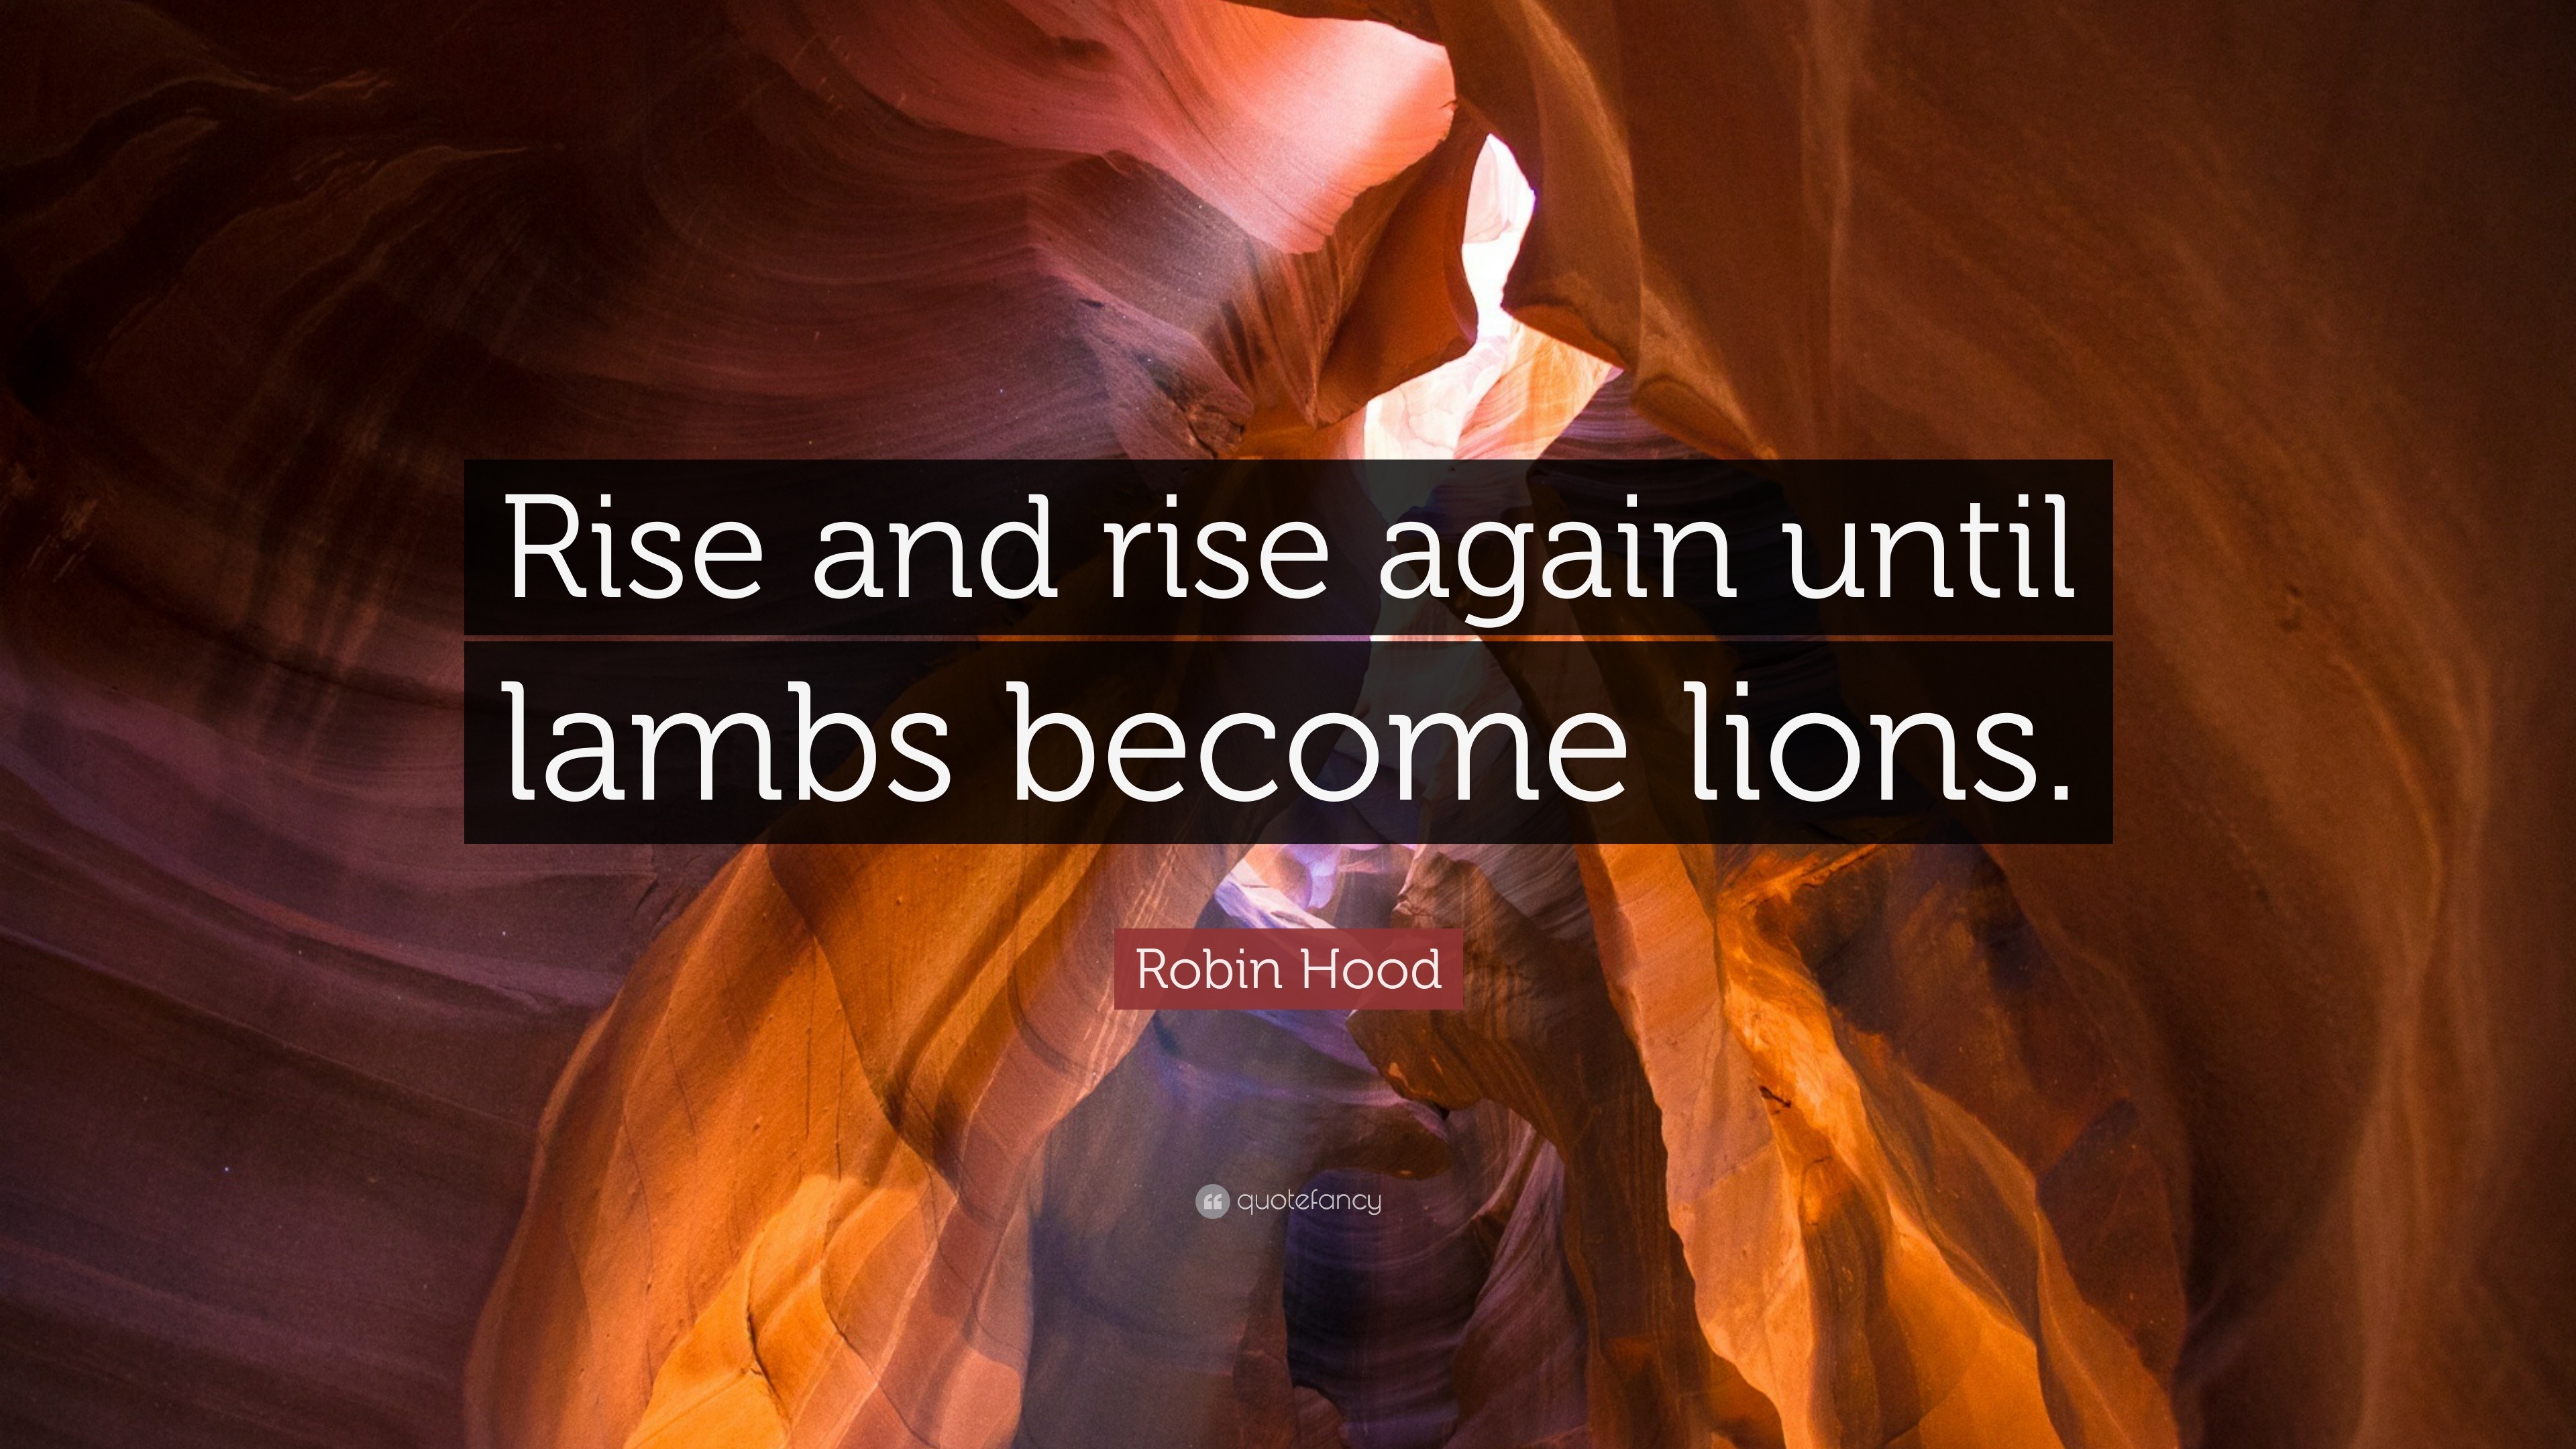 ROBIN KIDRise and rise again until lambs become lions